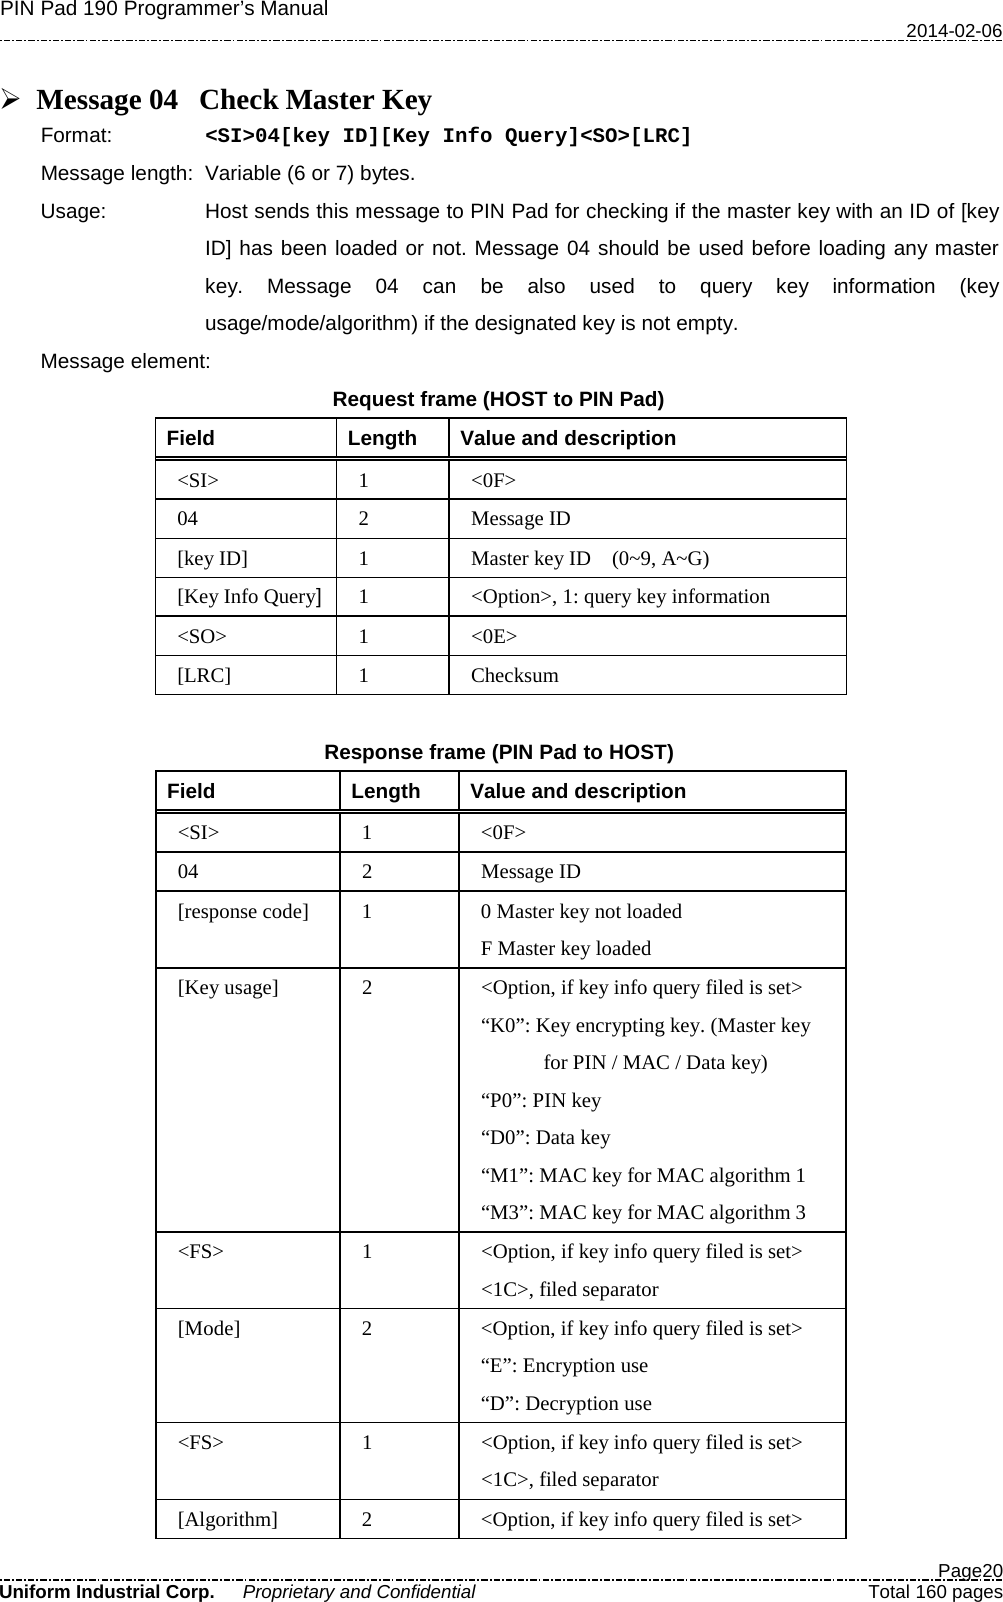 PIN Pad 190 Programmer’s Manual   2014-02-06  Page20 Uniform Industrial Corp. Proprietary and Confidential  Total 160 pages   Message 04 Check Master Key Format:   &lt;SI&gt;04[key ID][Key Info Query]&lt;SO&gt;[LRC] Message length: Variable (6 or 7) bytes. Usage: Host sends this message to PIN Pad for checking if the master key with an ID of [key ID] has been loaded or not. Message 04 should be used before loading any master key. Message 04 can be also used to query key information (key usage/mode/algorithm) if the designated key is not empty. Message element: Request frame (HOST to PIN Pad) Field  Length  Value and description &lt;SI&gt;  1  &lt;0F&gt; 04  2  Message ID [key ID]  1  Master key ID    (0~9, A~G) [Key Info Query]  1  &lt;Option&gt;, 1: query key information &lt;SO&gt;  1  &lt;0E&gt; [LRC]  1  Checksum    Response frame (PIN Pad to HOST) Field  Length  Value and description &lt;SI&gt;  1  &lt;0F&gt; 04  2  Message ID [response code]  1  0 Master key not loaded F Master key loaded [Key usage]  2  &lt;Option, if key info query filed is set&gt; “K0”: Key encrypting key. (Master key   for PIN / MAC / Data key) “P0”: PIN key “D0”: Data key “M1”: MAC key for MAC algorithm 1 “M3”: MAC key for MAC algorithm 3 &lt;FS&gt;  1  &lt;Option, if key info query filed is set&gt; &lt;1C&gt;, filed separator [Mode]  2  &lt;Option, if key info query filed is set&gt; “E”: Encryption use “D”: Decryption use &lt;FS&gt;  1  &lt;Option, if key info query filed is set&gt; &lt;1C&gt;, filed separator [Algorithm]  2  &lt;Option, if key info query filed is set&gt; 